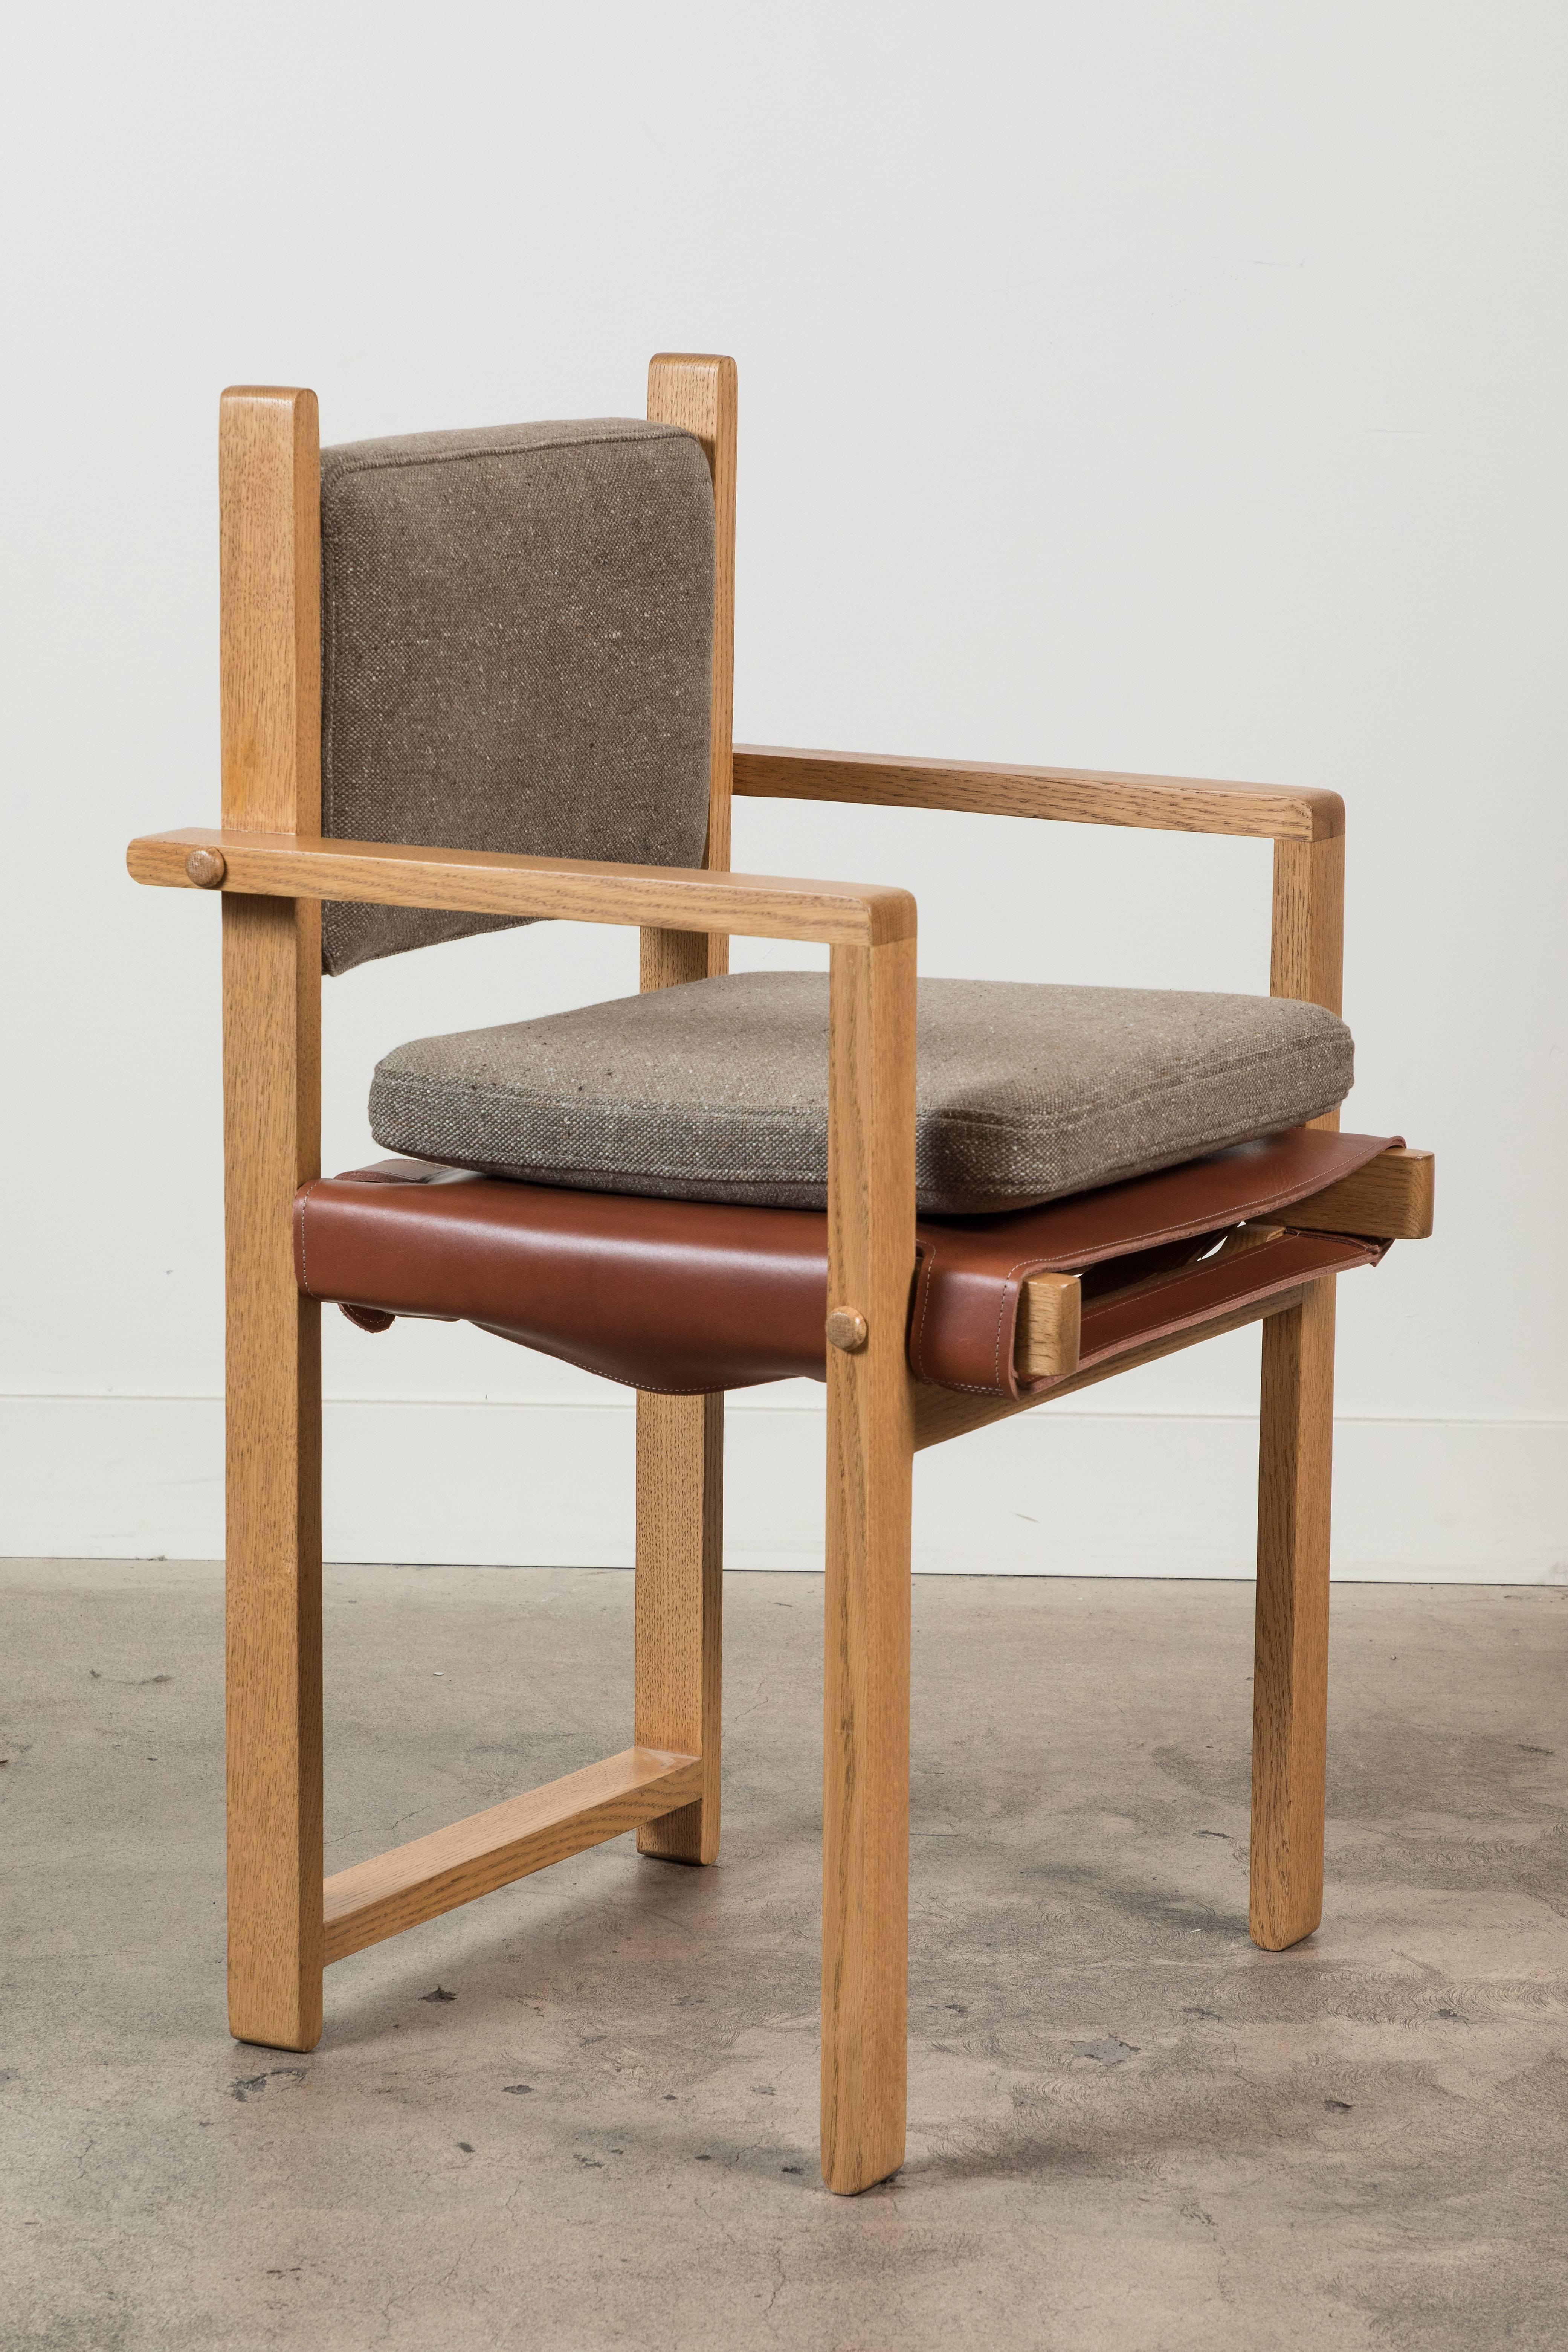 The Morro Dining Chair is made from a solid American walnut or white oak frame and features an upholstered back cushion and a leather sling seat. An optional loose seat cushion is also available.

Available to order in customer's own material with a